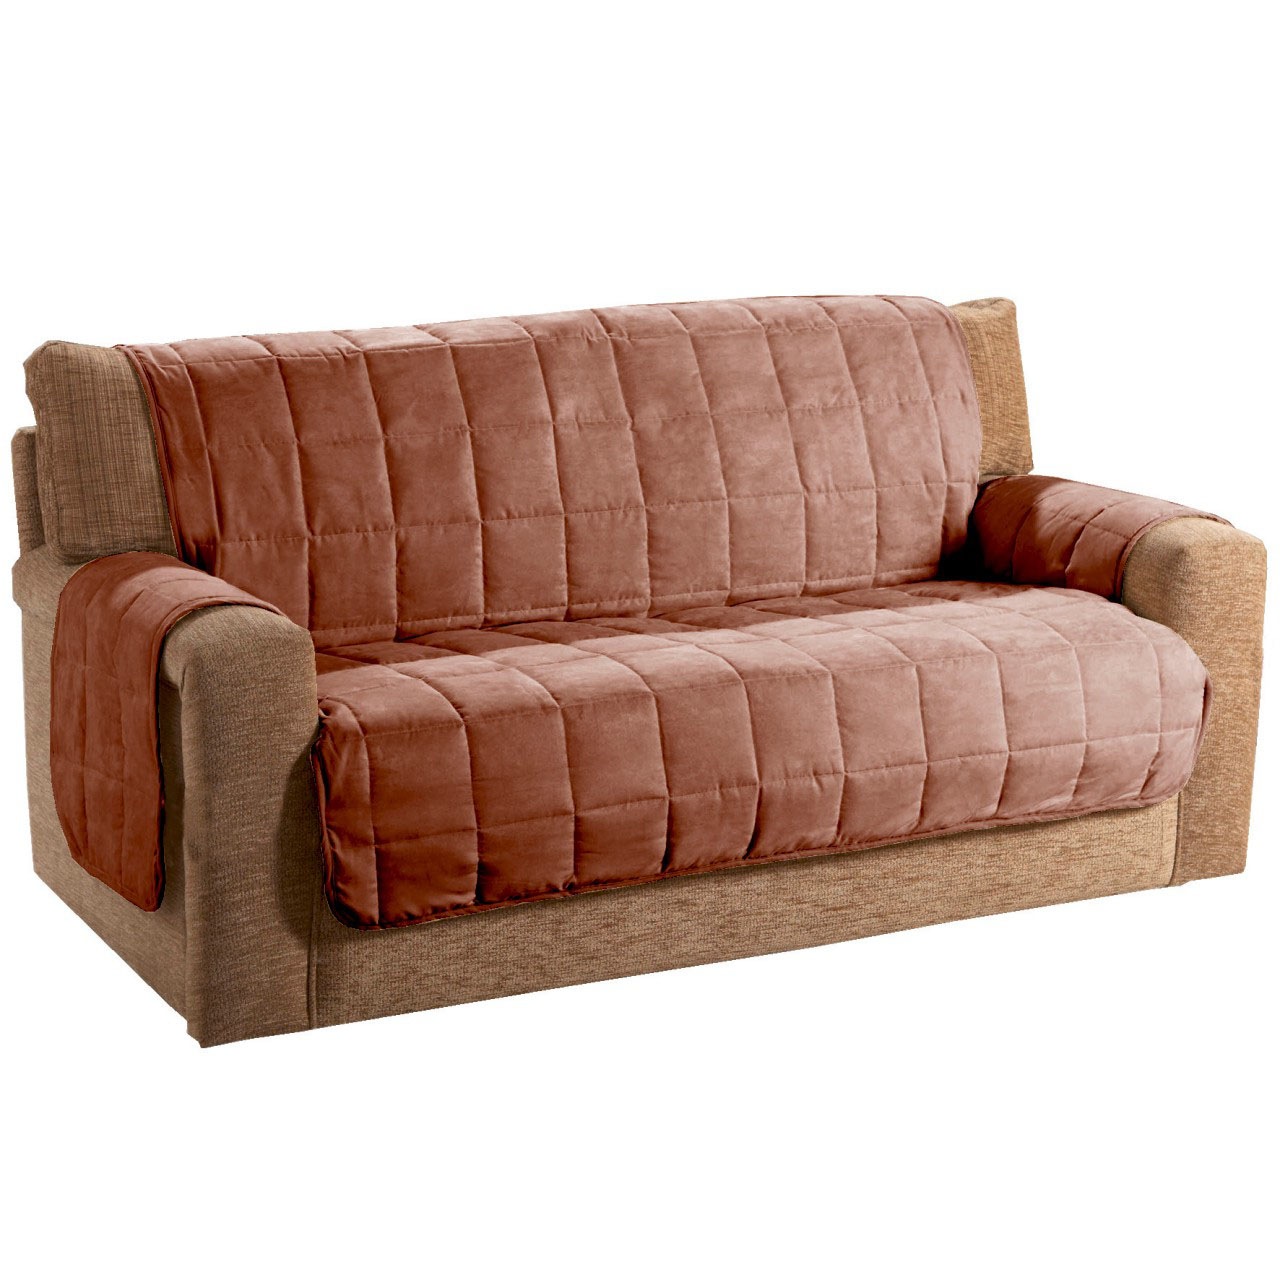 Faux Suede 3-seater Sofa Cover